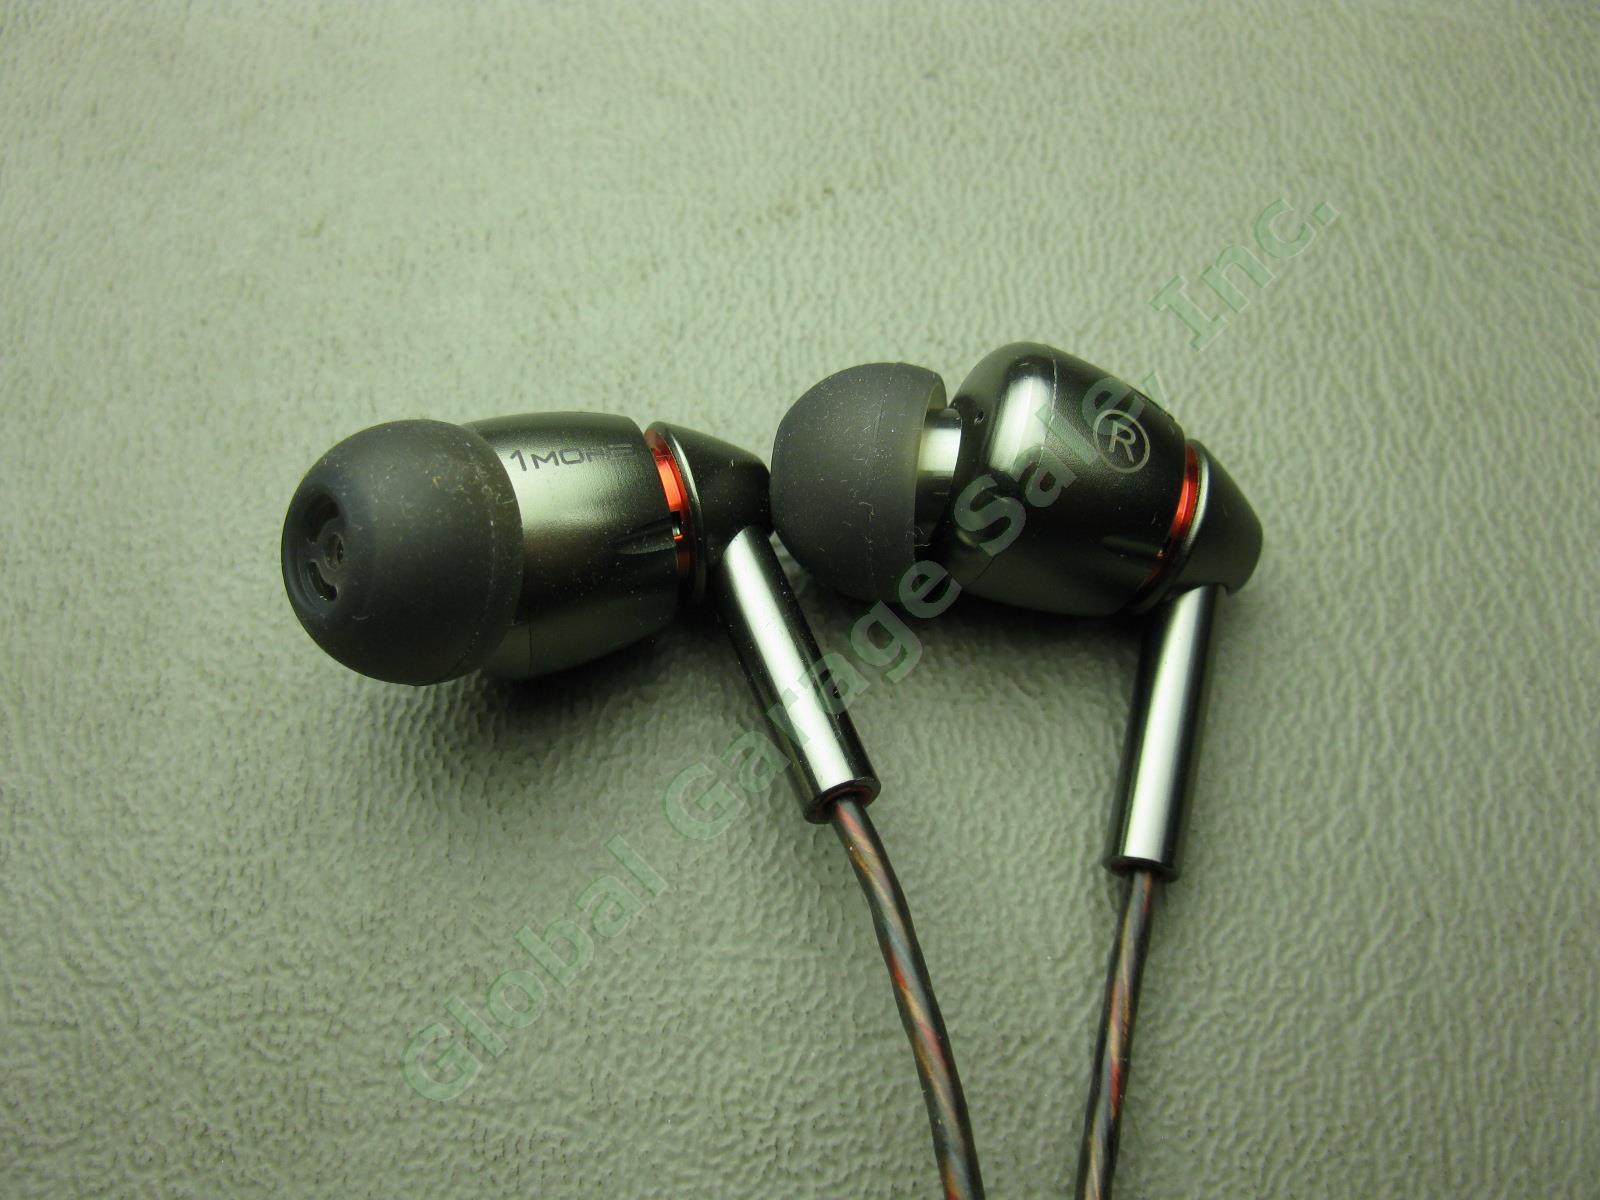 1more E1010 Quad Driver In-Ear Headphones Earphones Earbuds Apple iOS Mic Remote 5